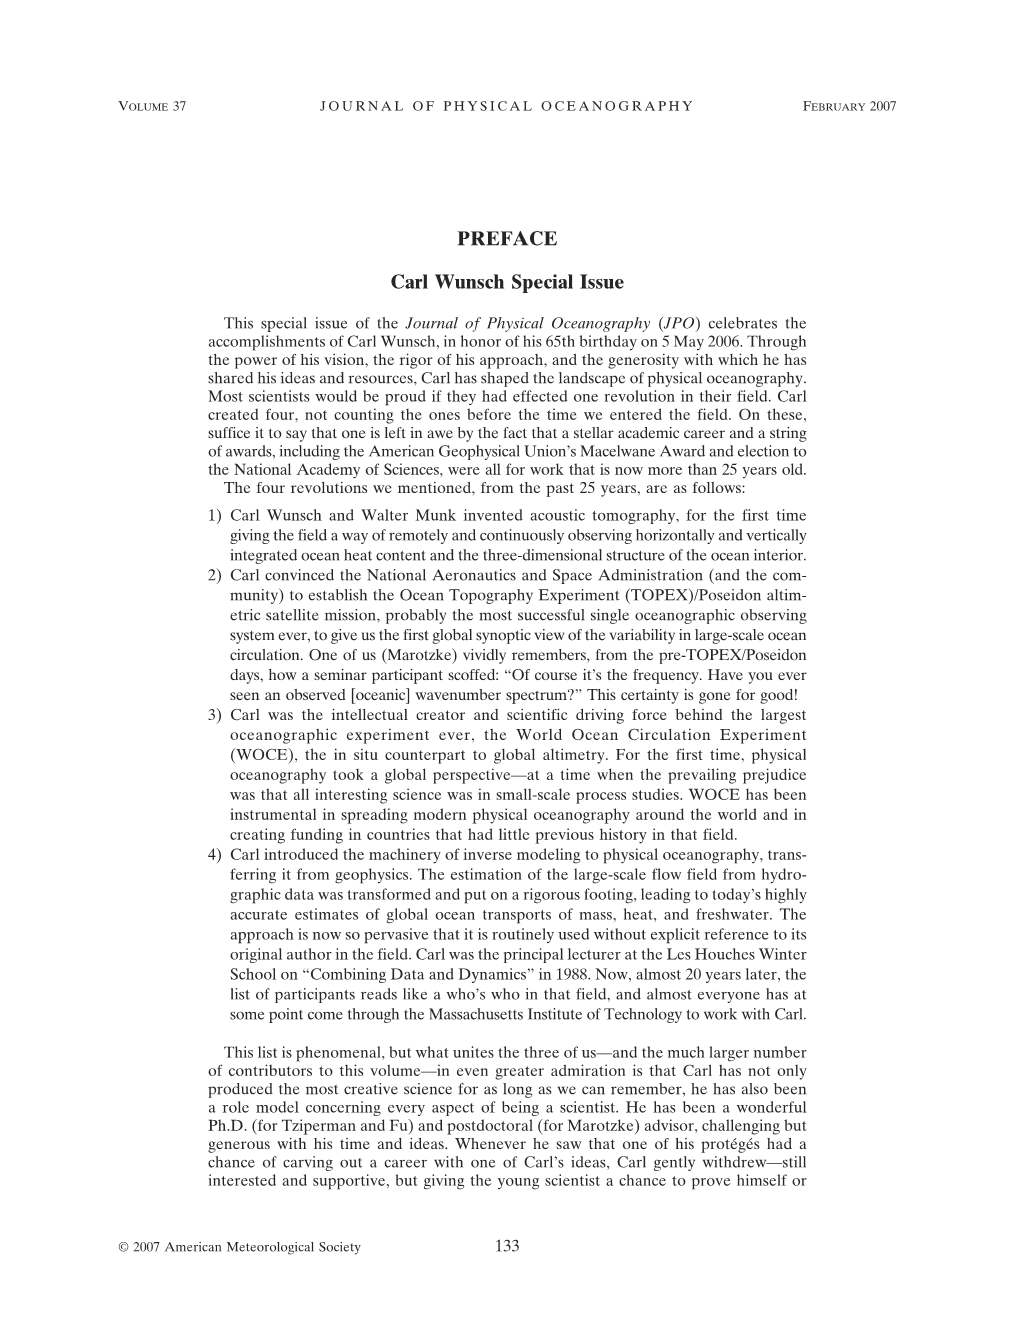 PREFACE Carl Wunsch Special Issue